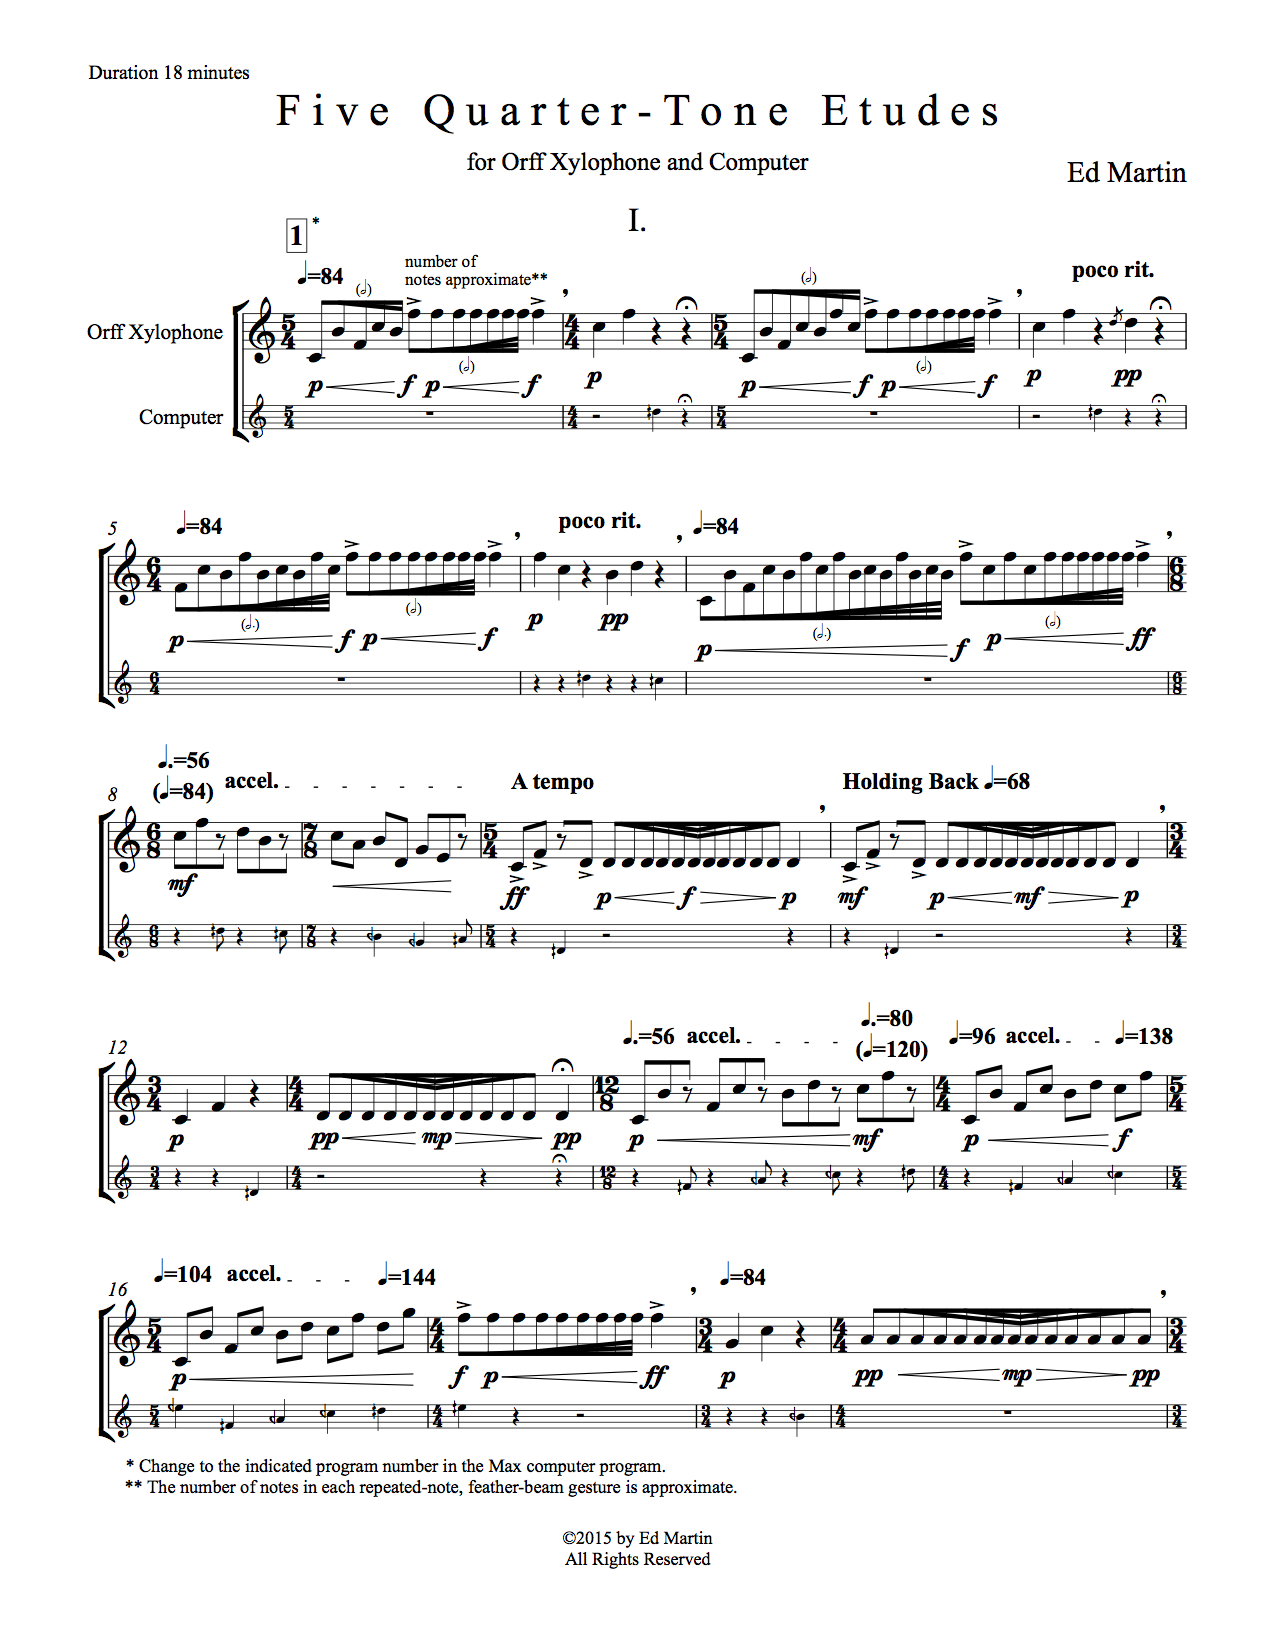 Quarter Tone Etudes for Orff Xylophone (dragged) 4.jpg